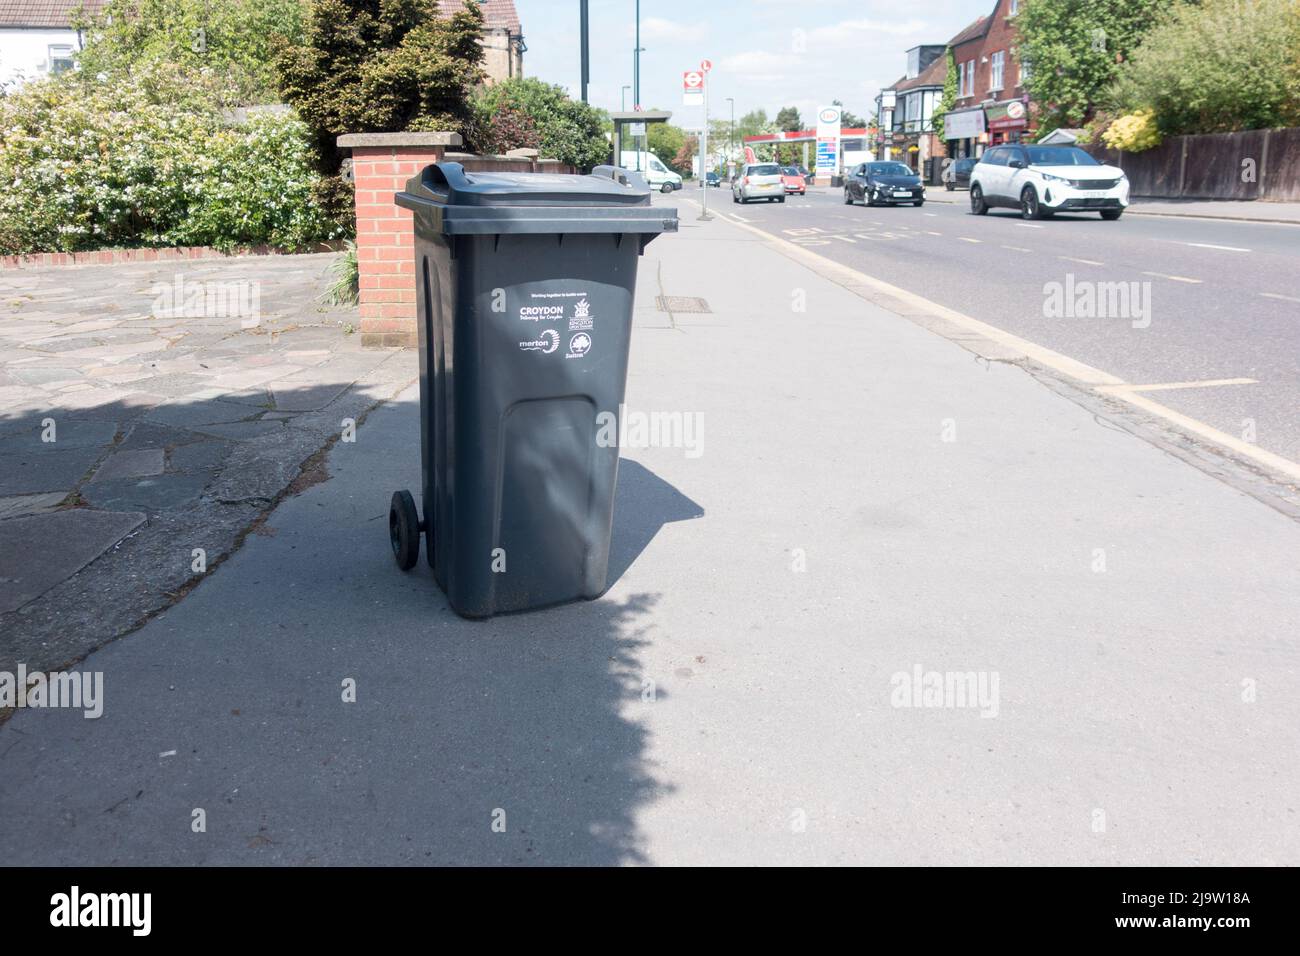 Wheelie bin left on the pavement side walk during a bin collection day in Croydon Stock Photo